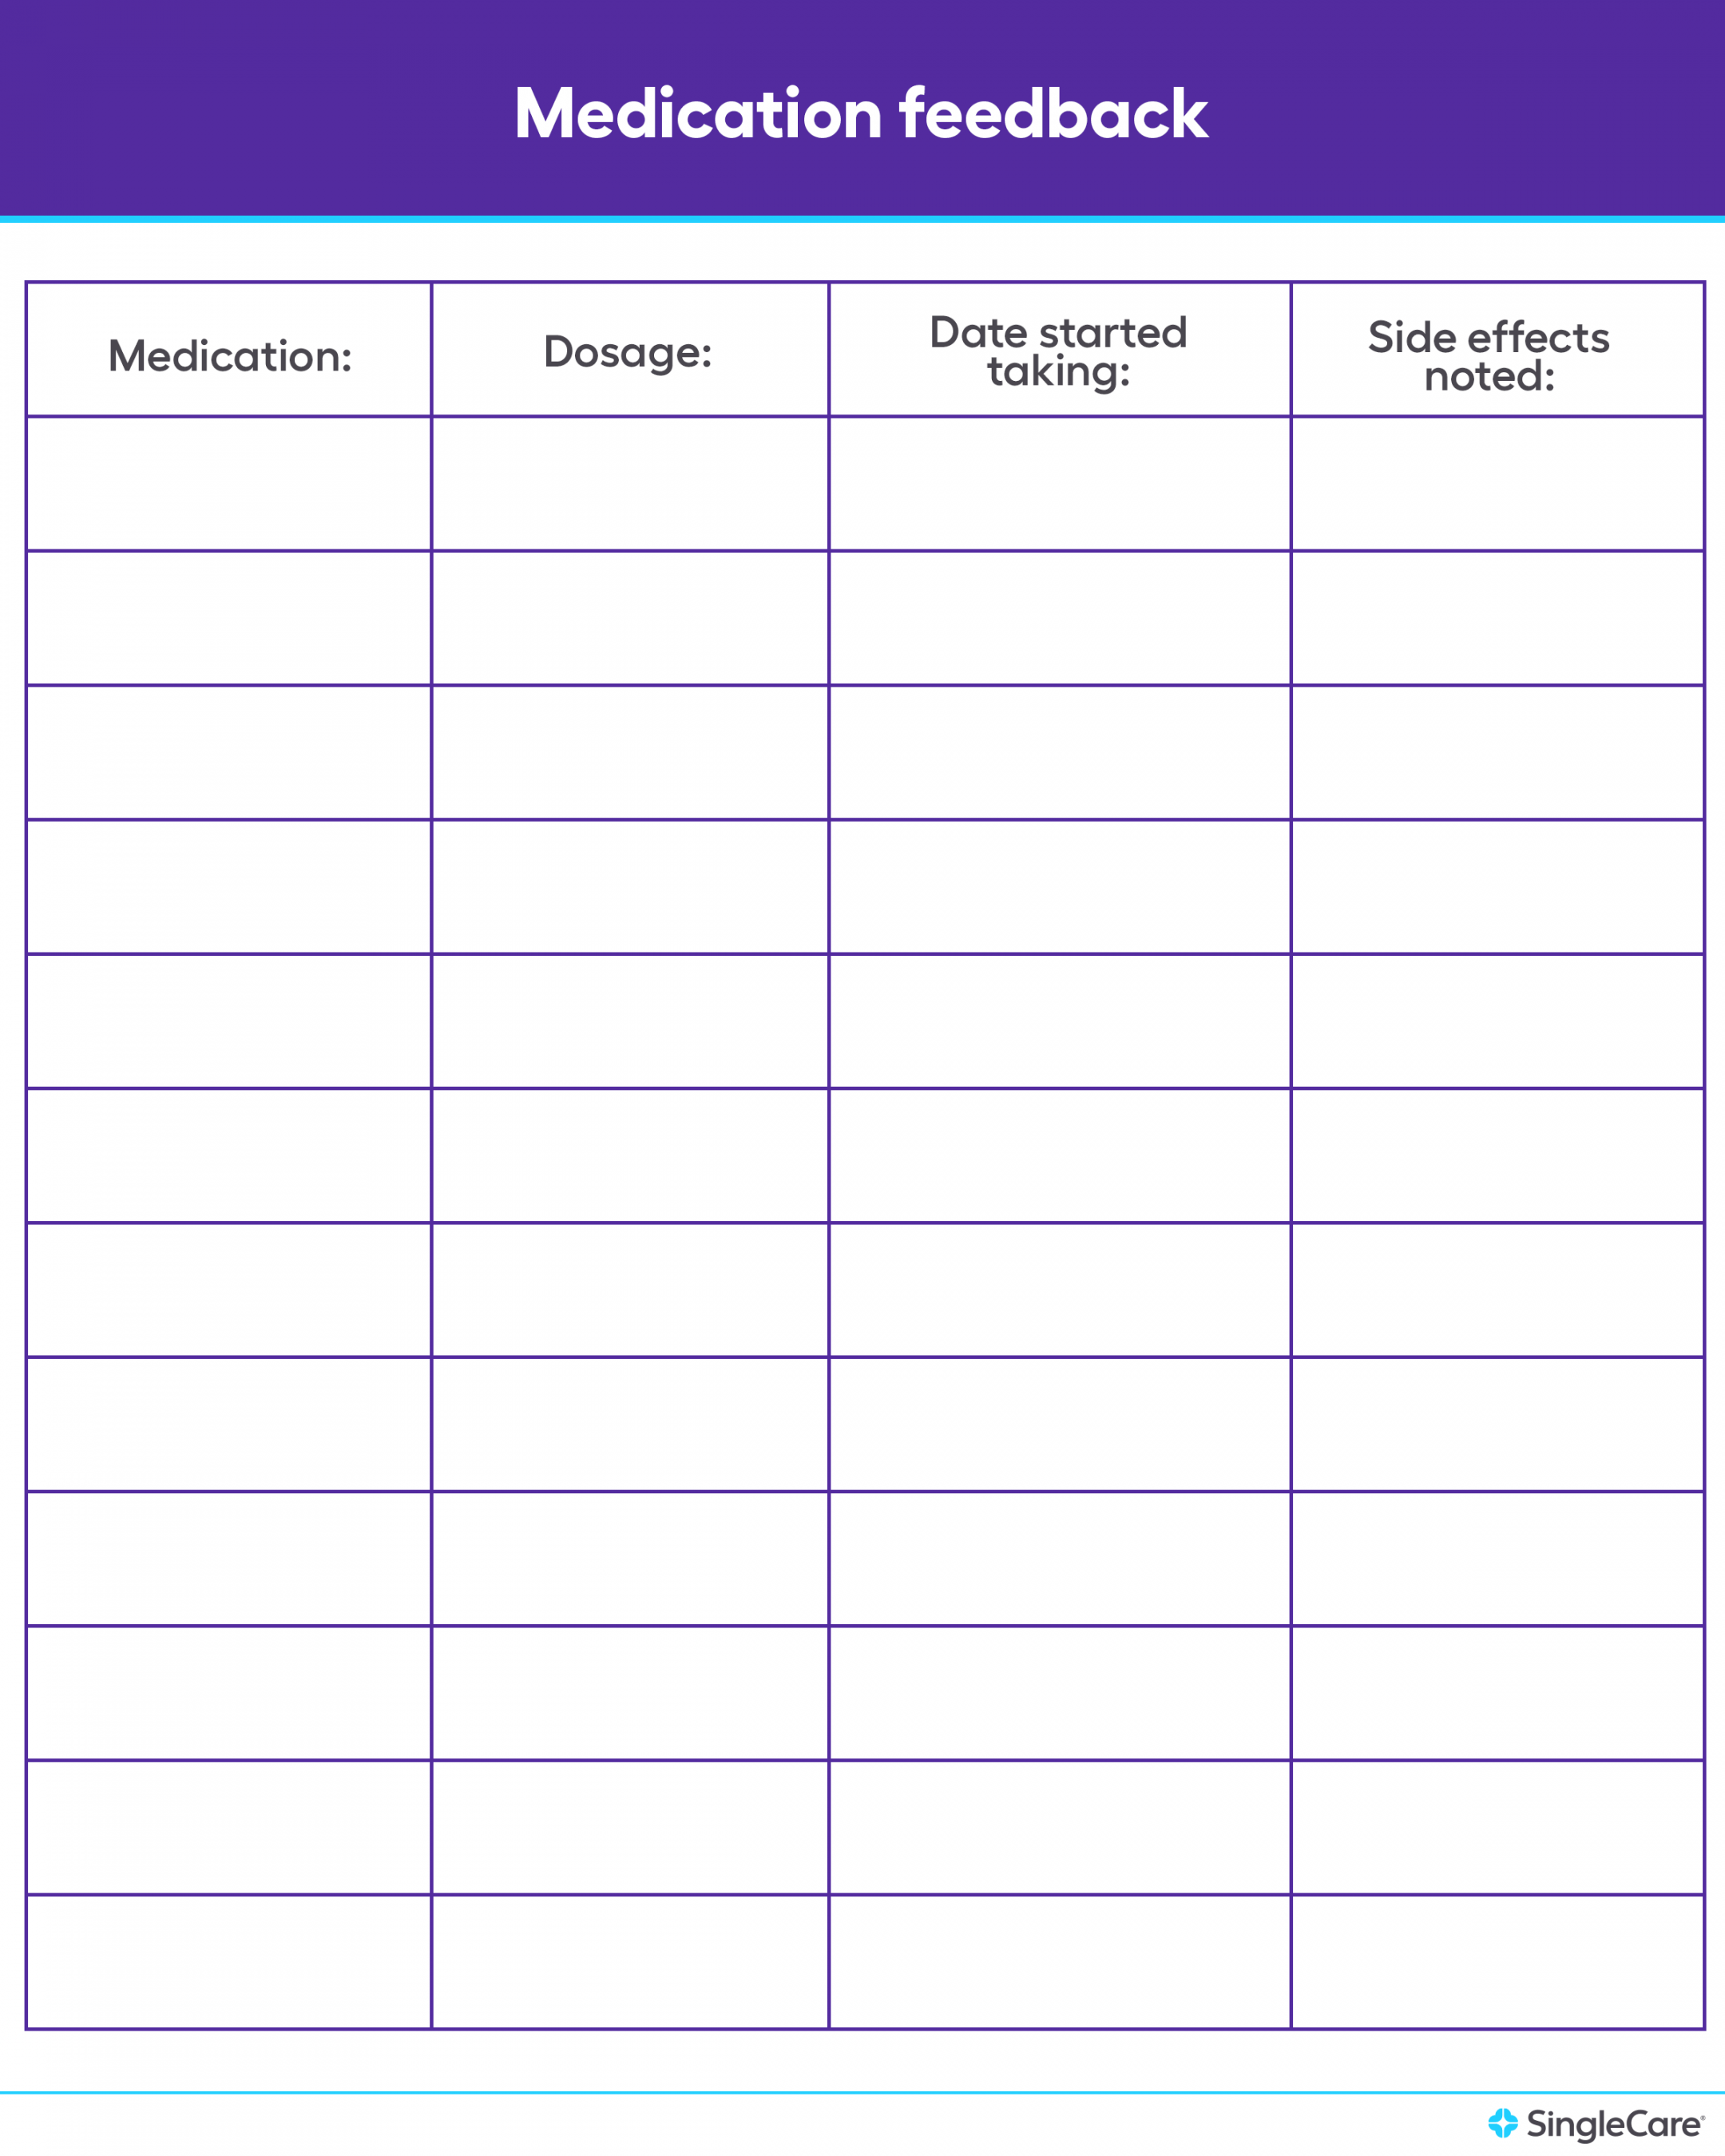 Free medication list templates for patients and caregivers - FREE Printables - Free Printable Daily Medication Chart For Elderly